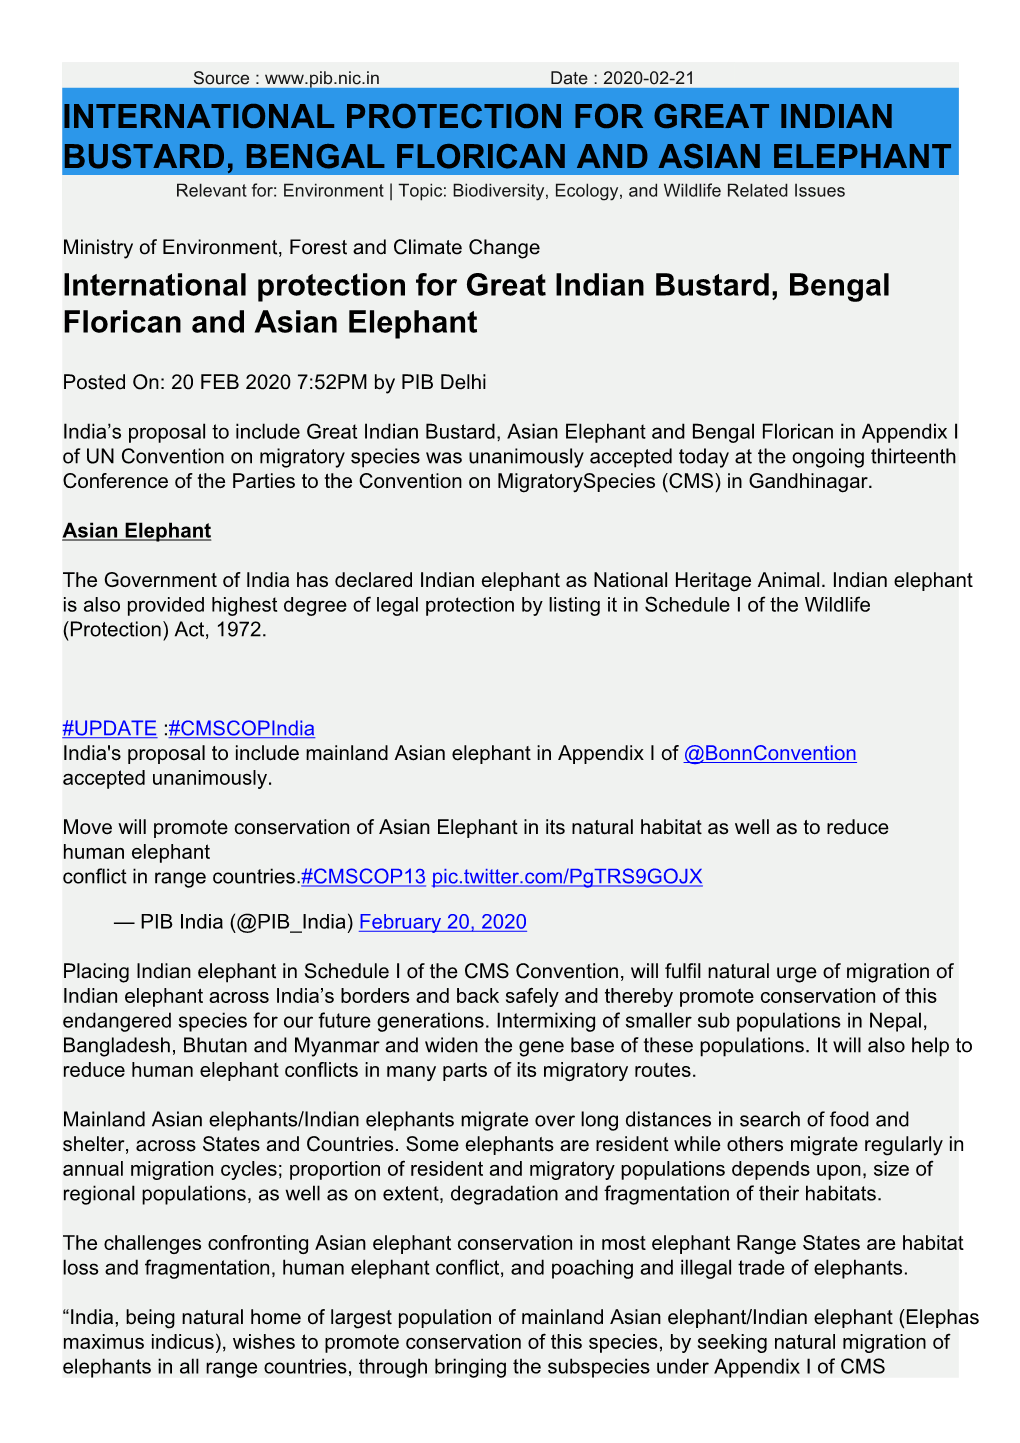 International Protection for Great Indian Bustard, Bengal Florican And